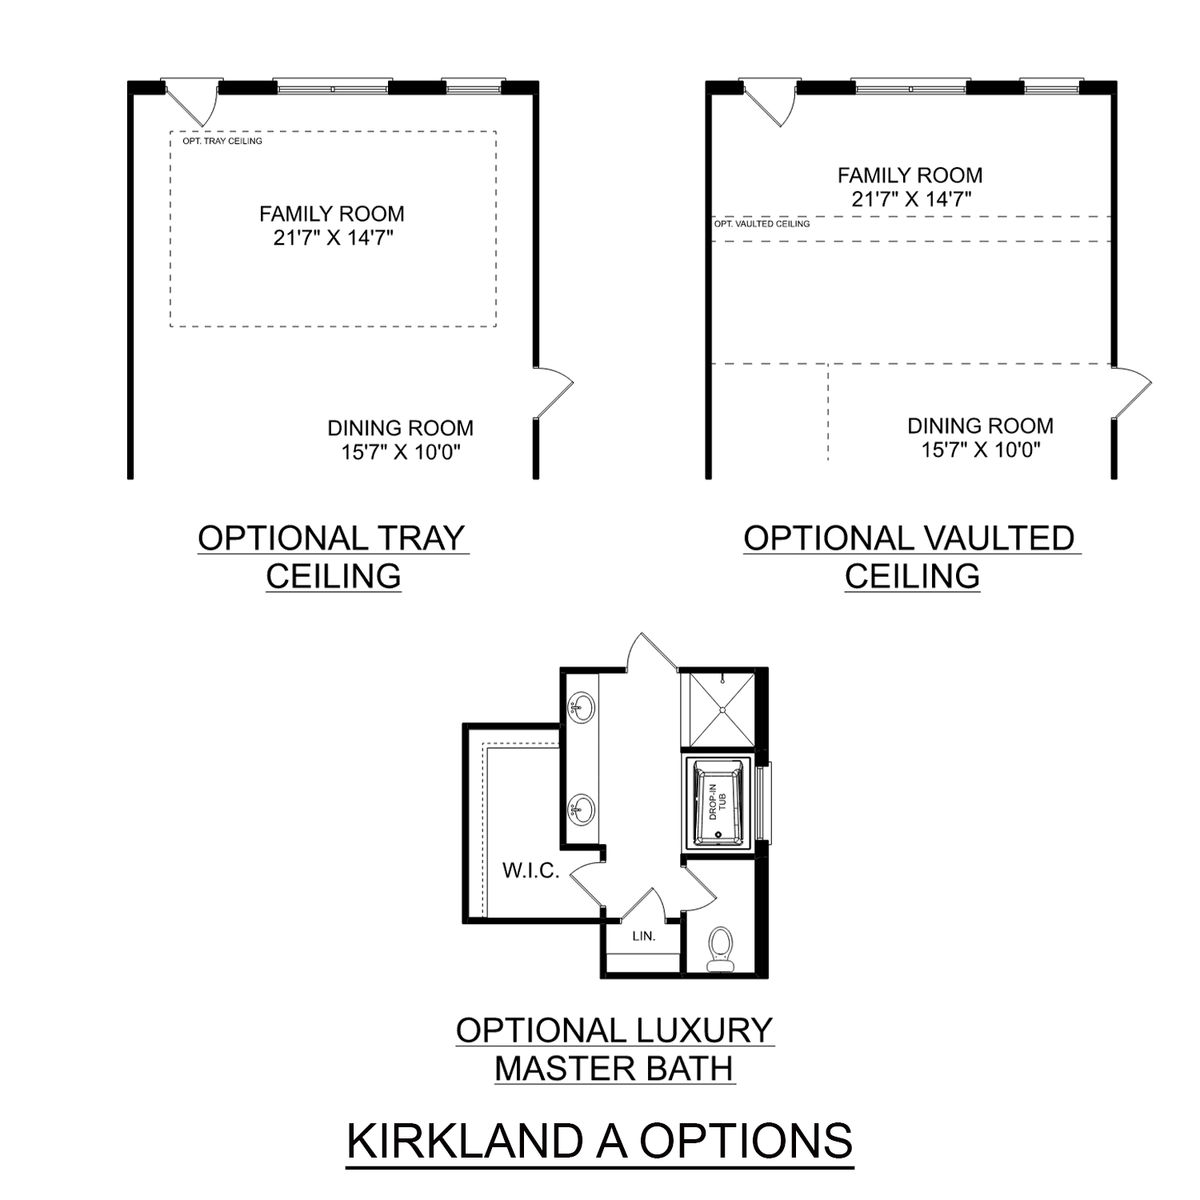 2 - The Kirkland floor plan layout for 610 Ronnie Drive SE in Davidson Homes' Cain Park community.